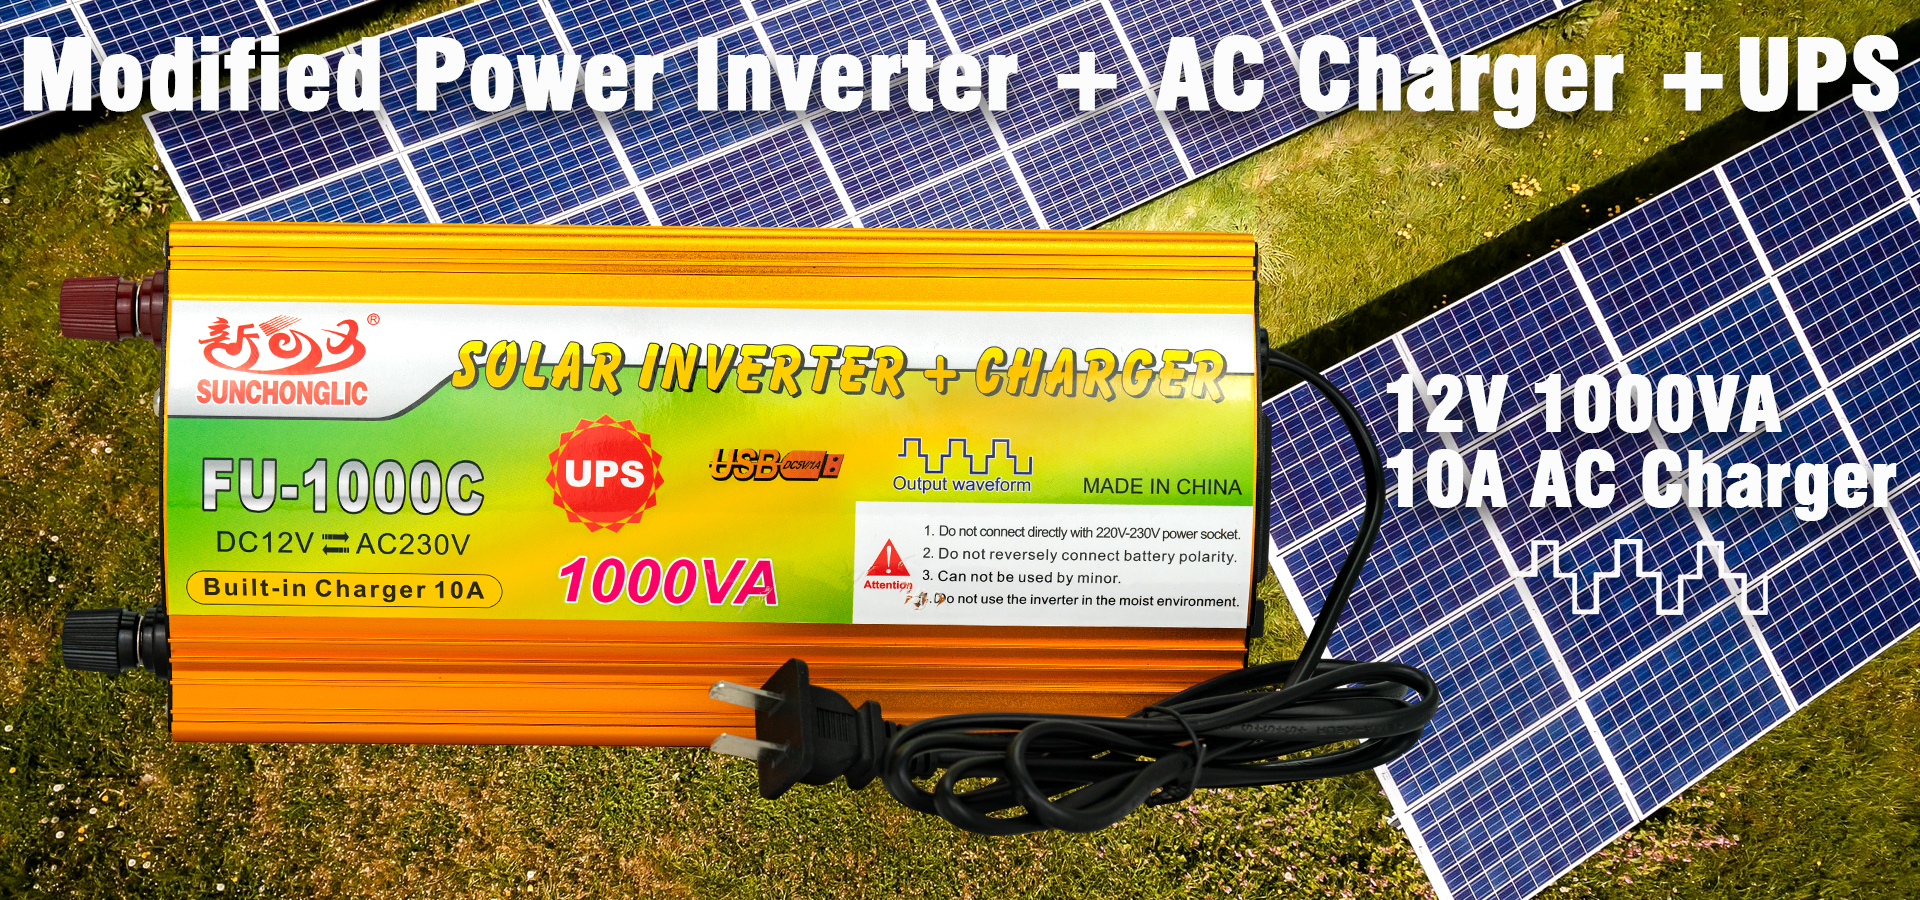 Mdified UPS charger inverter